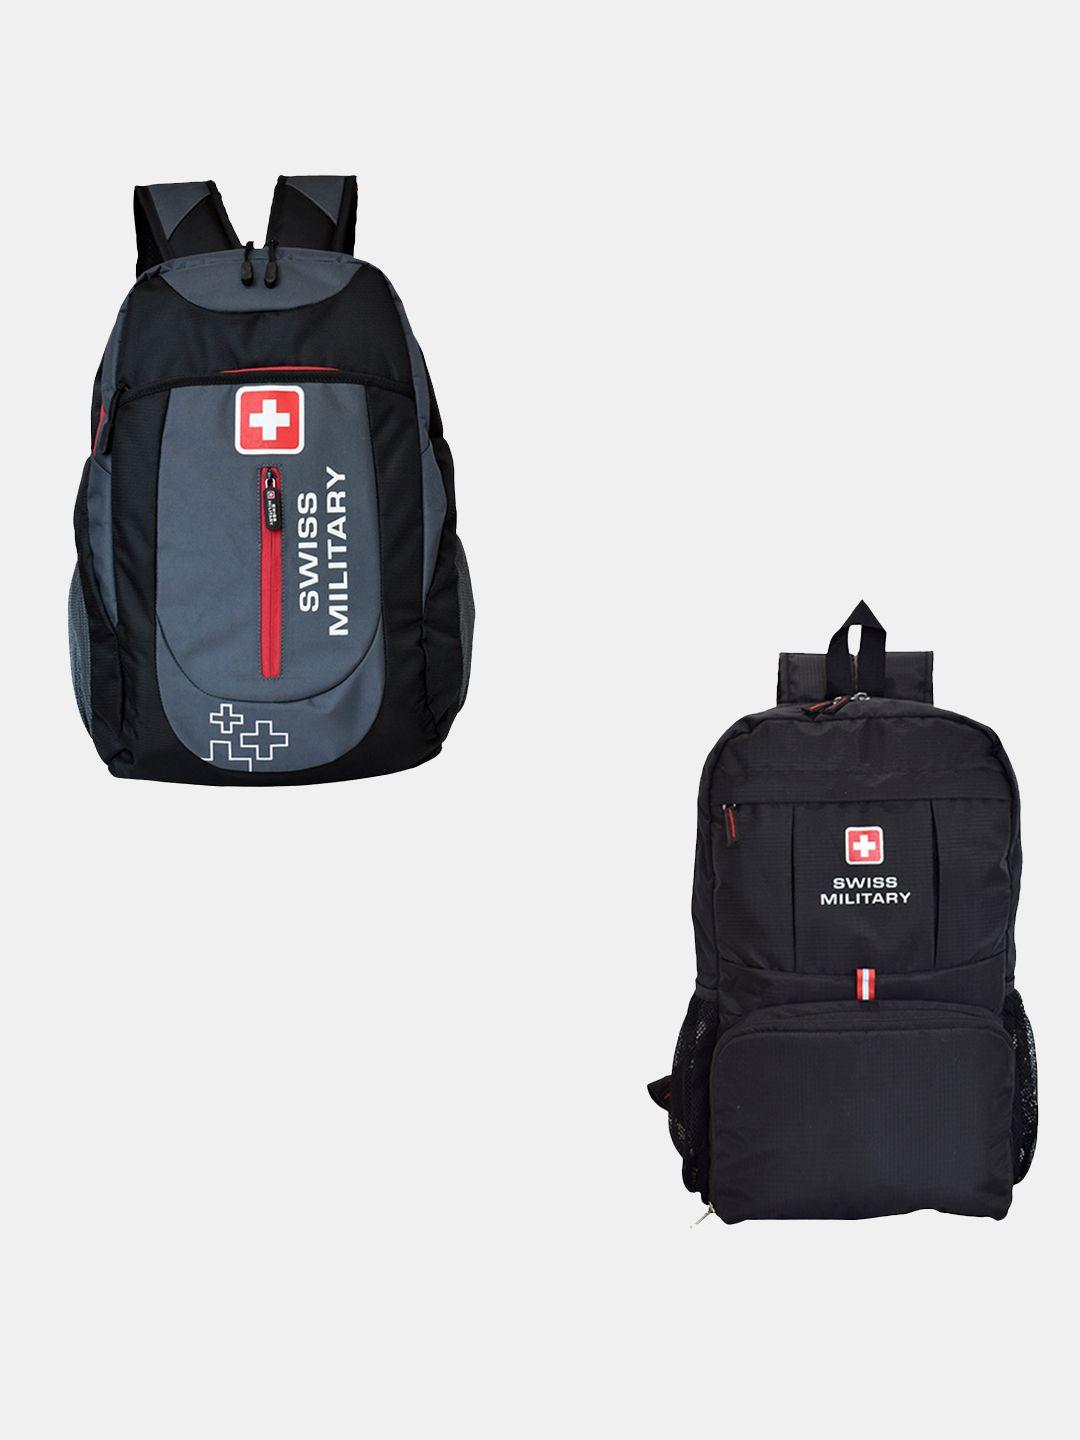 swiss military brand logo backpack and foldable bag